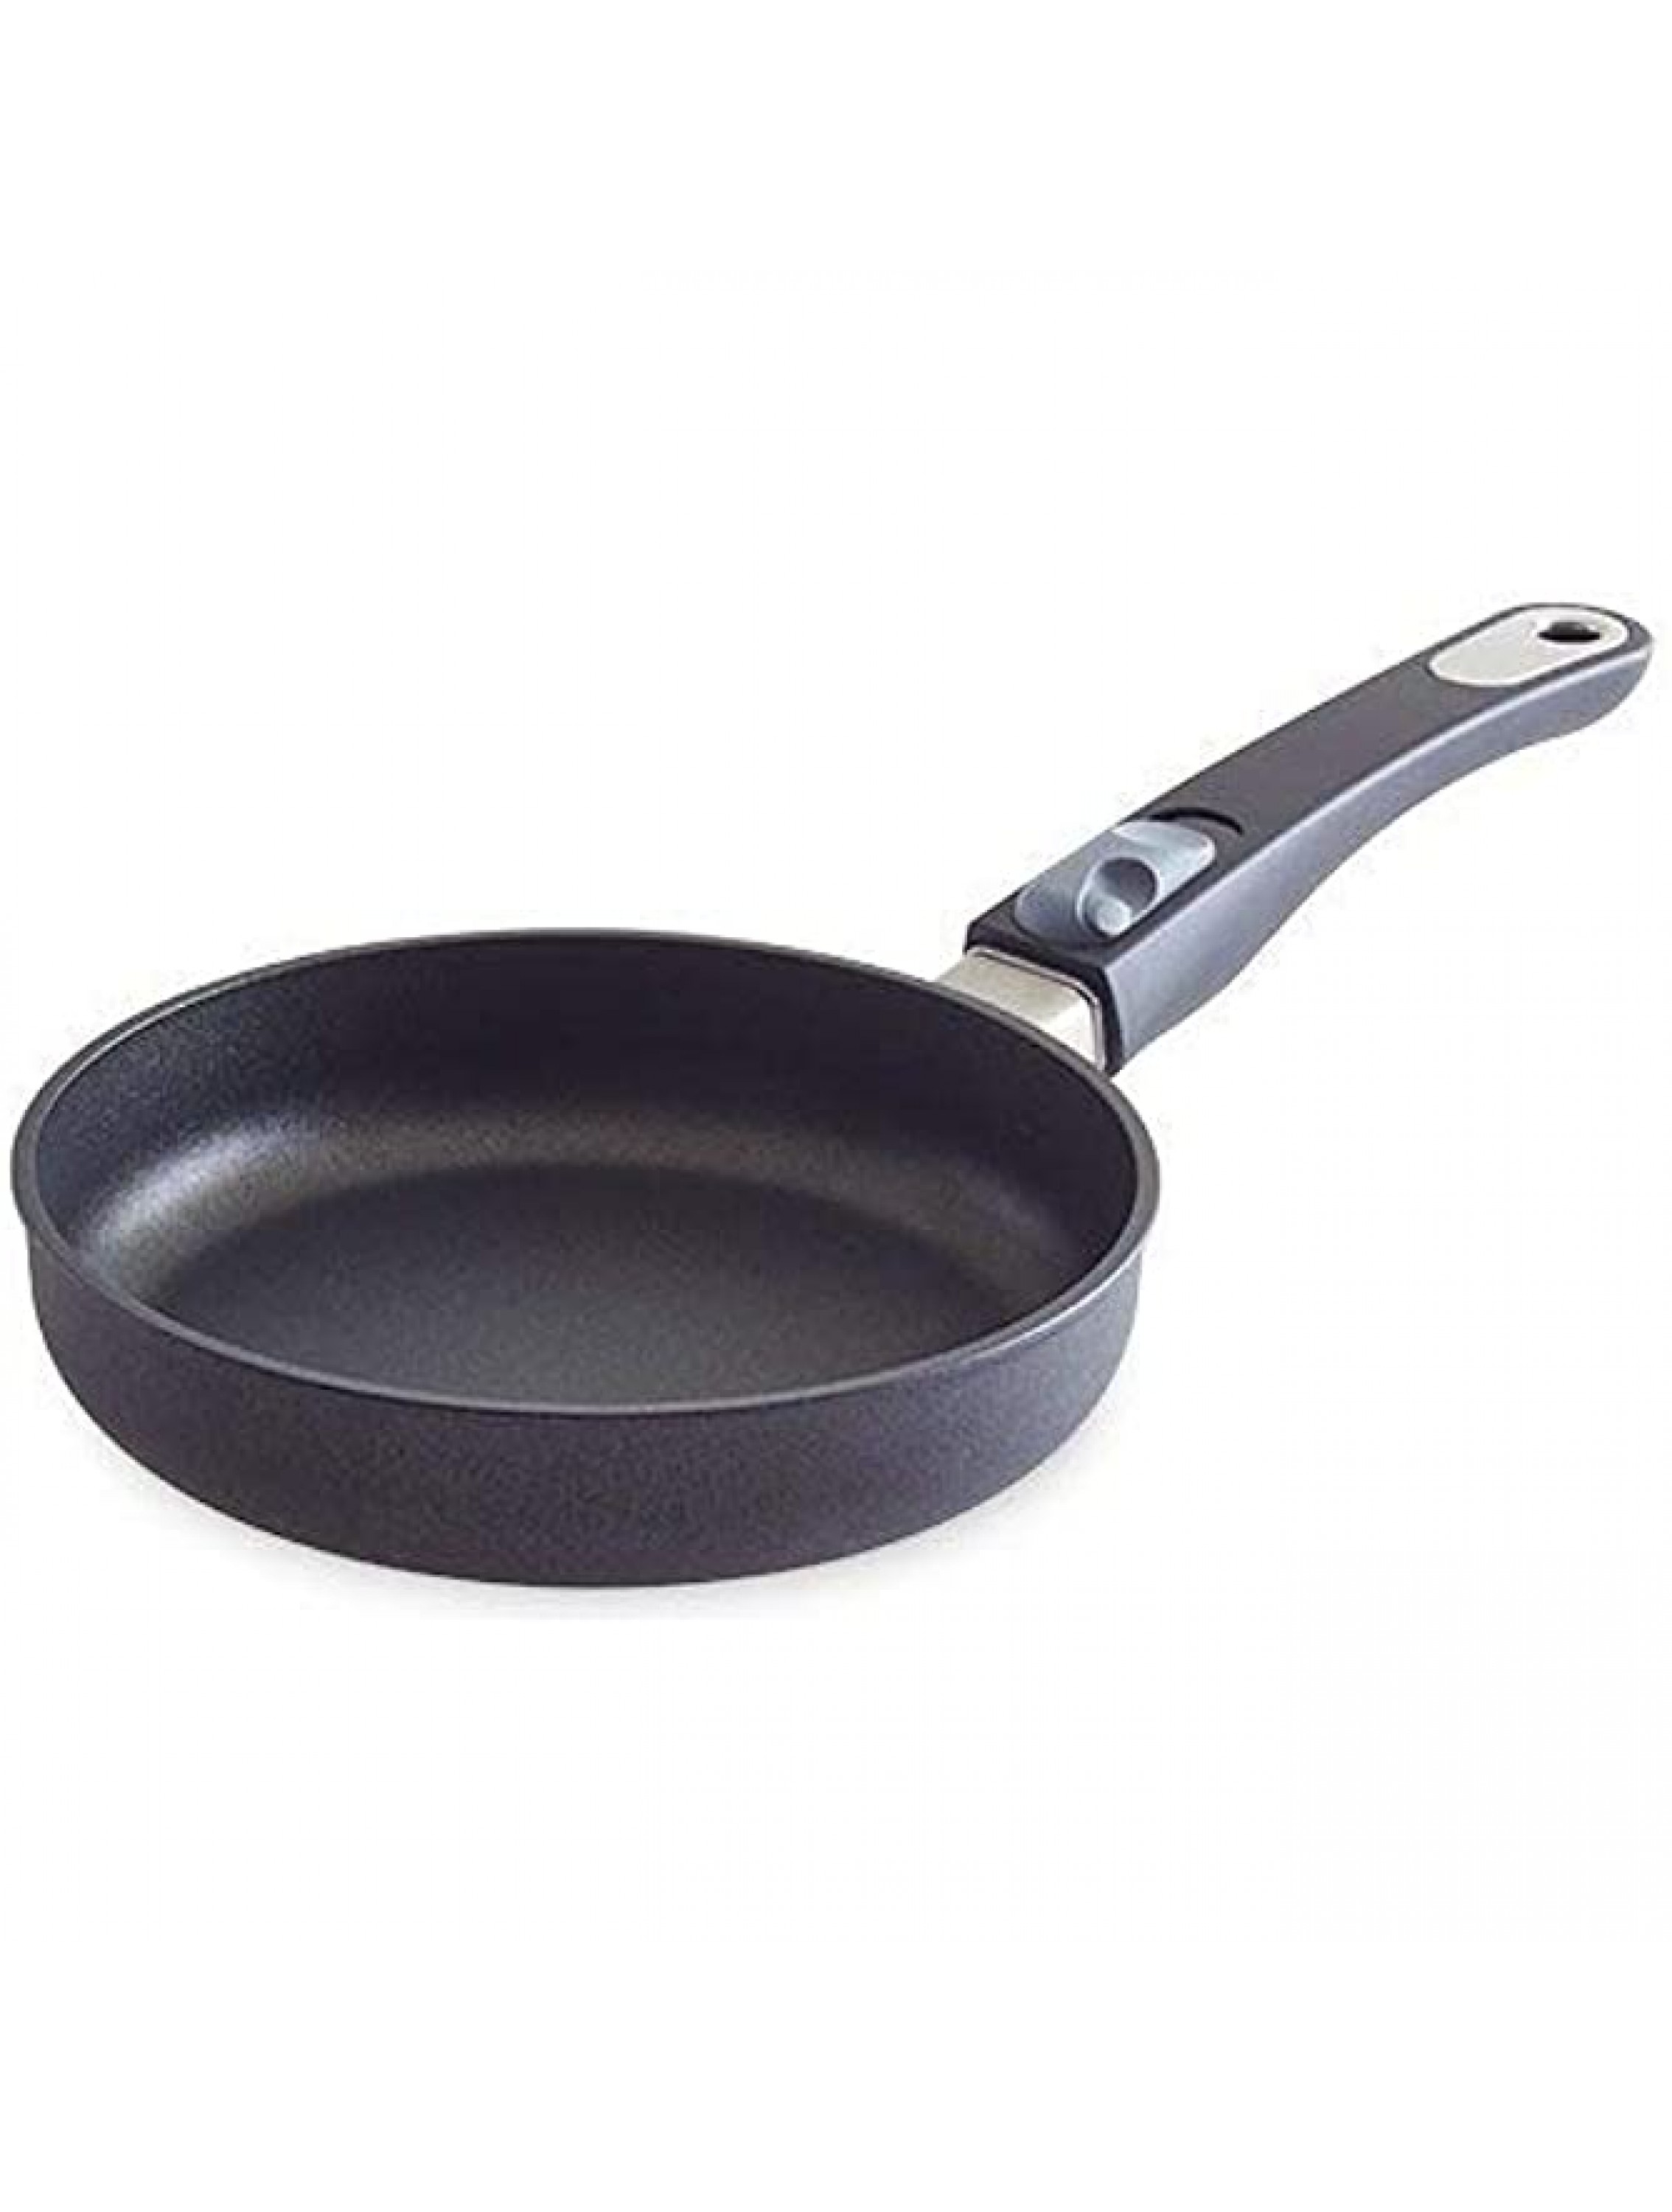 PAMPERED CHEF New model. #2729 NONSTICK 8 FRY PAN NEW JUST OUT MARCH 2018 - BWT2IY7KH